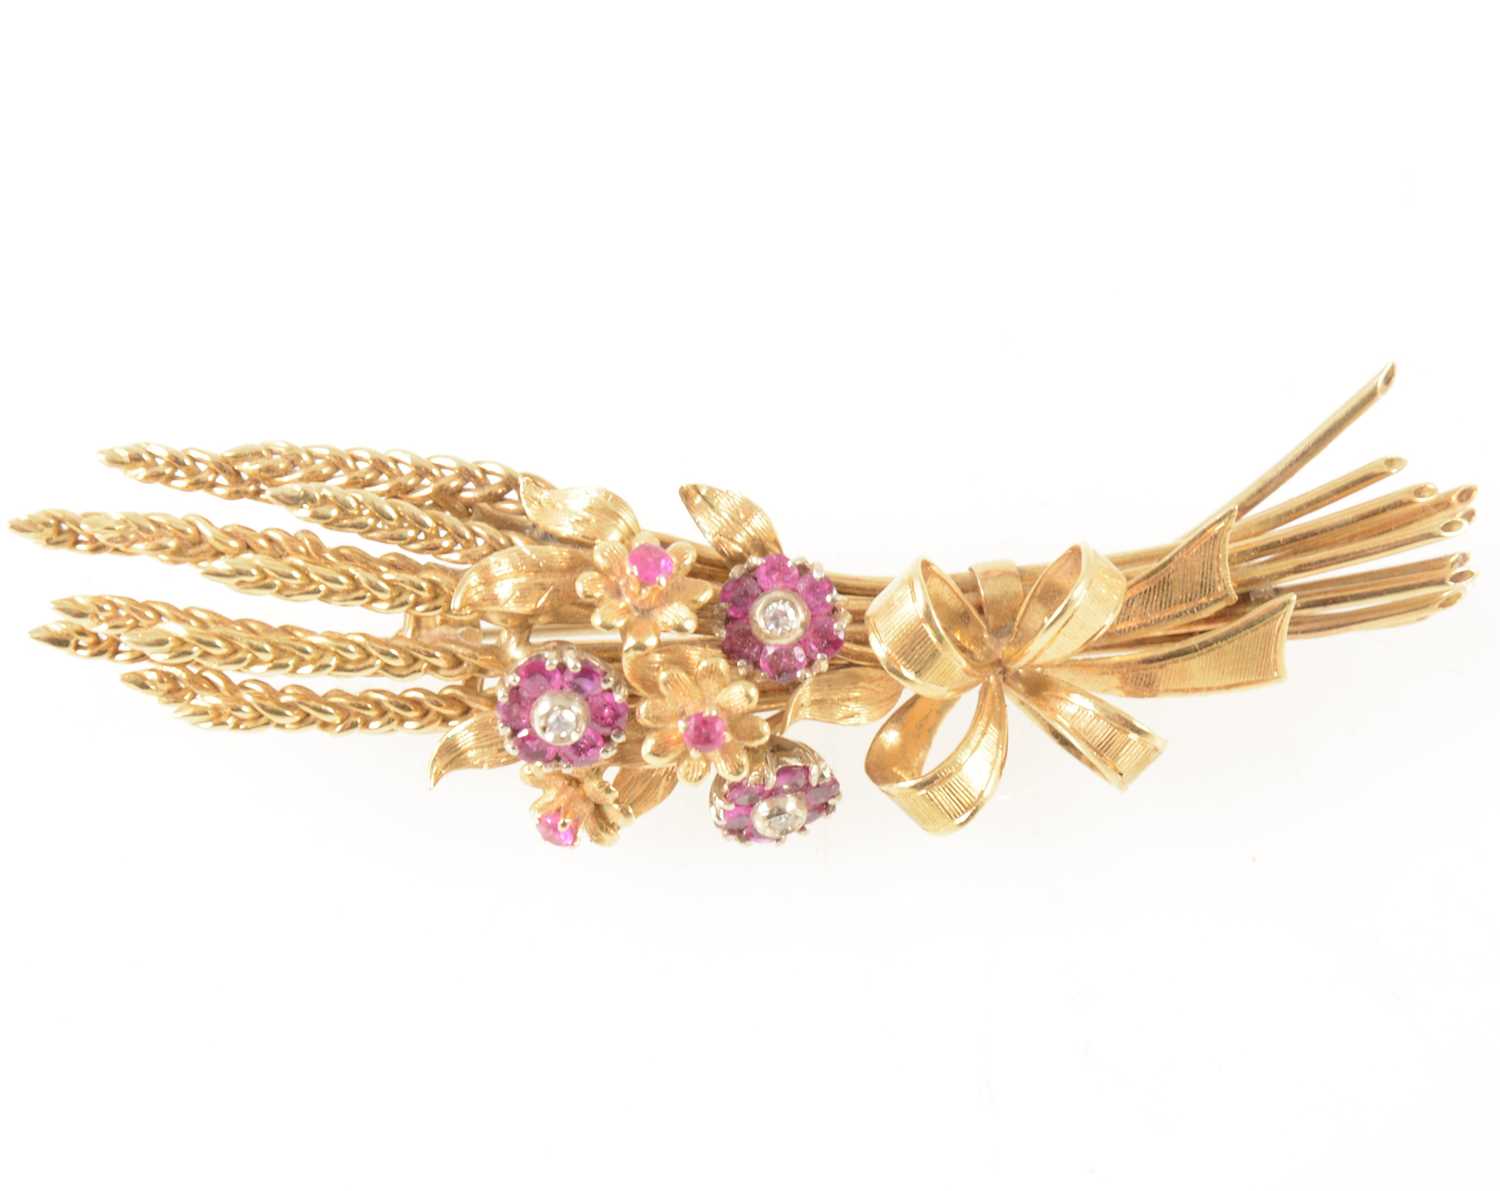 Lot 72 - An 18 carat gold ruby and diamond brooch, in the form of sheaf of corn.